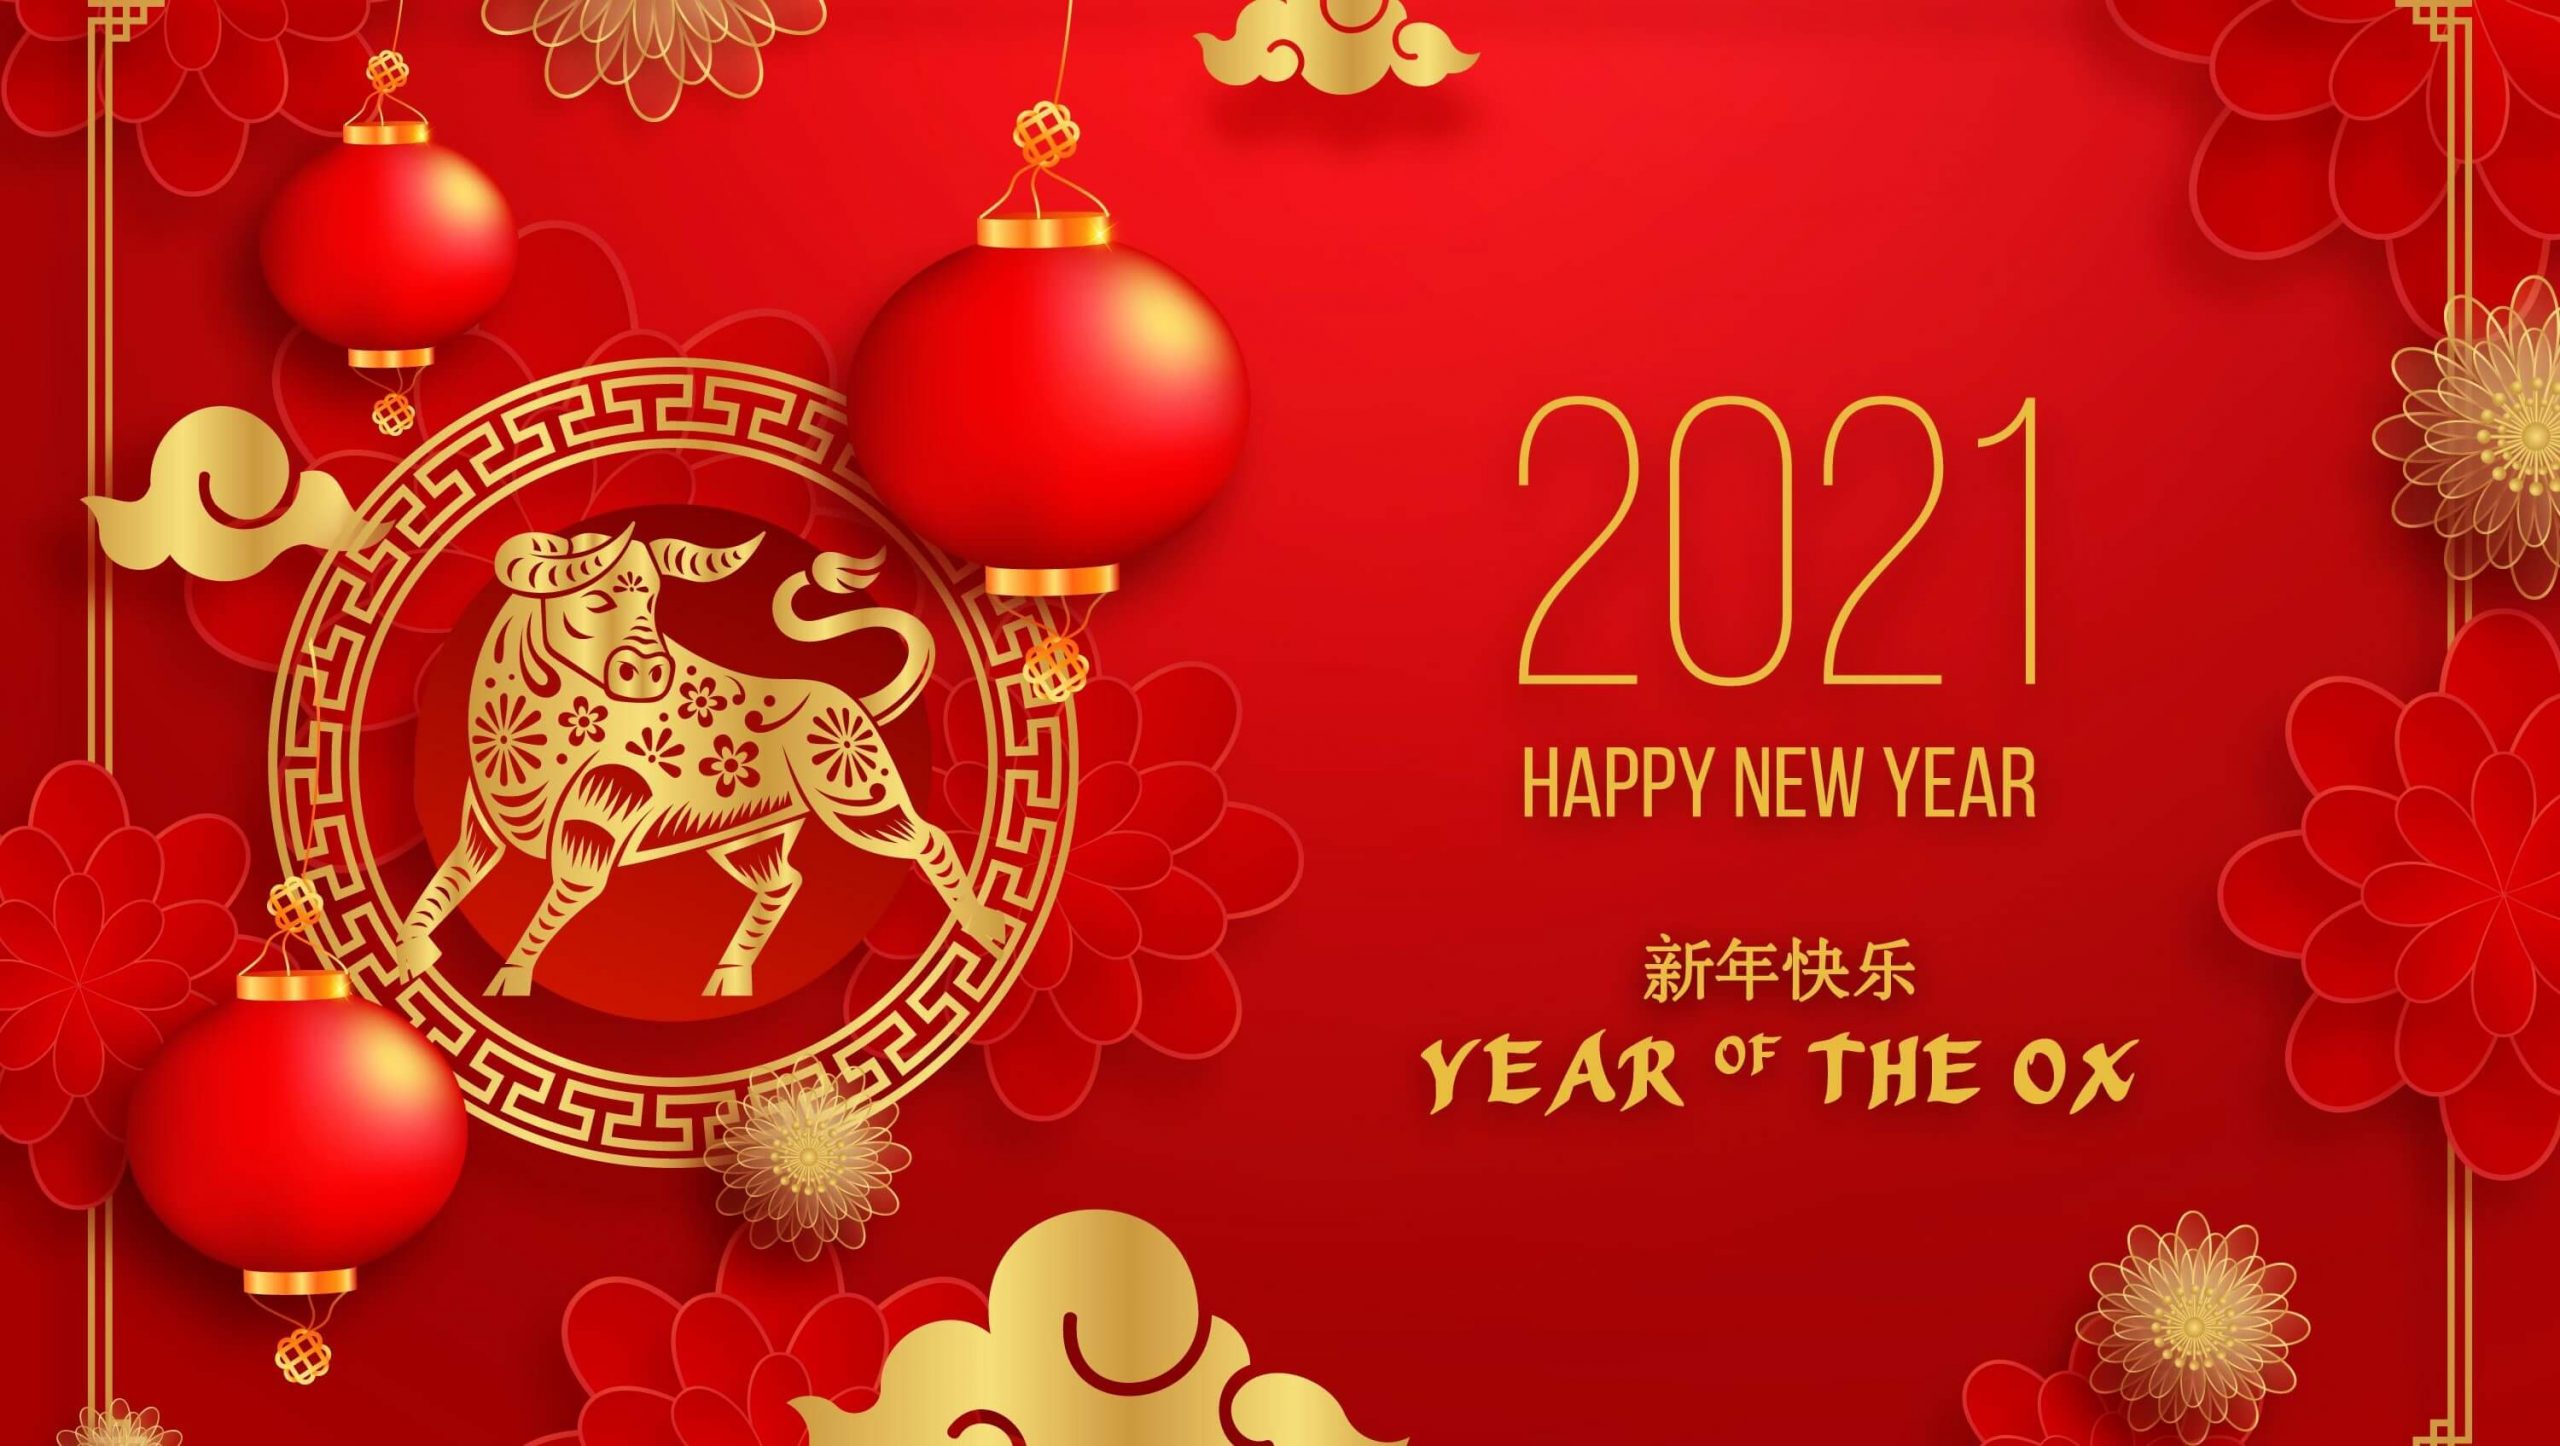 Chinese New Year special: Best deals, all you need to know & fun facts